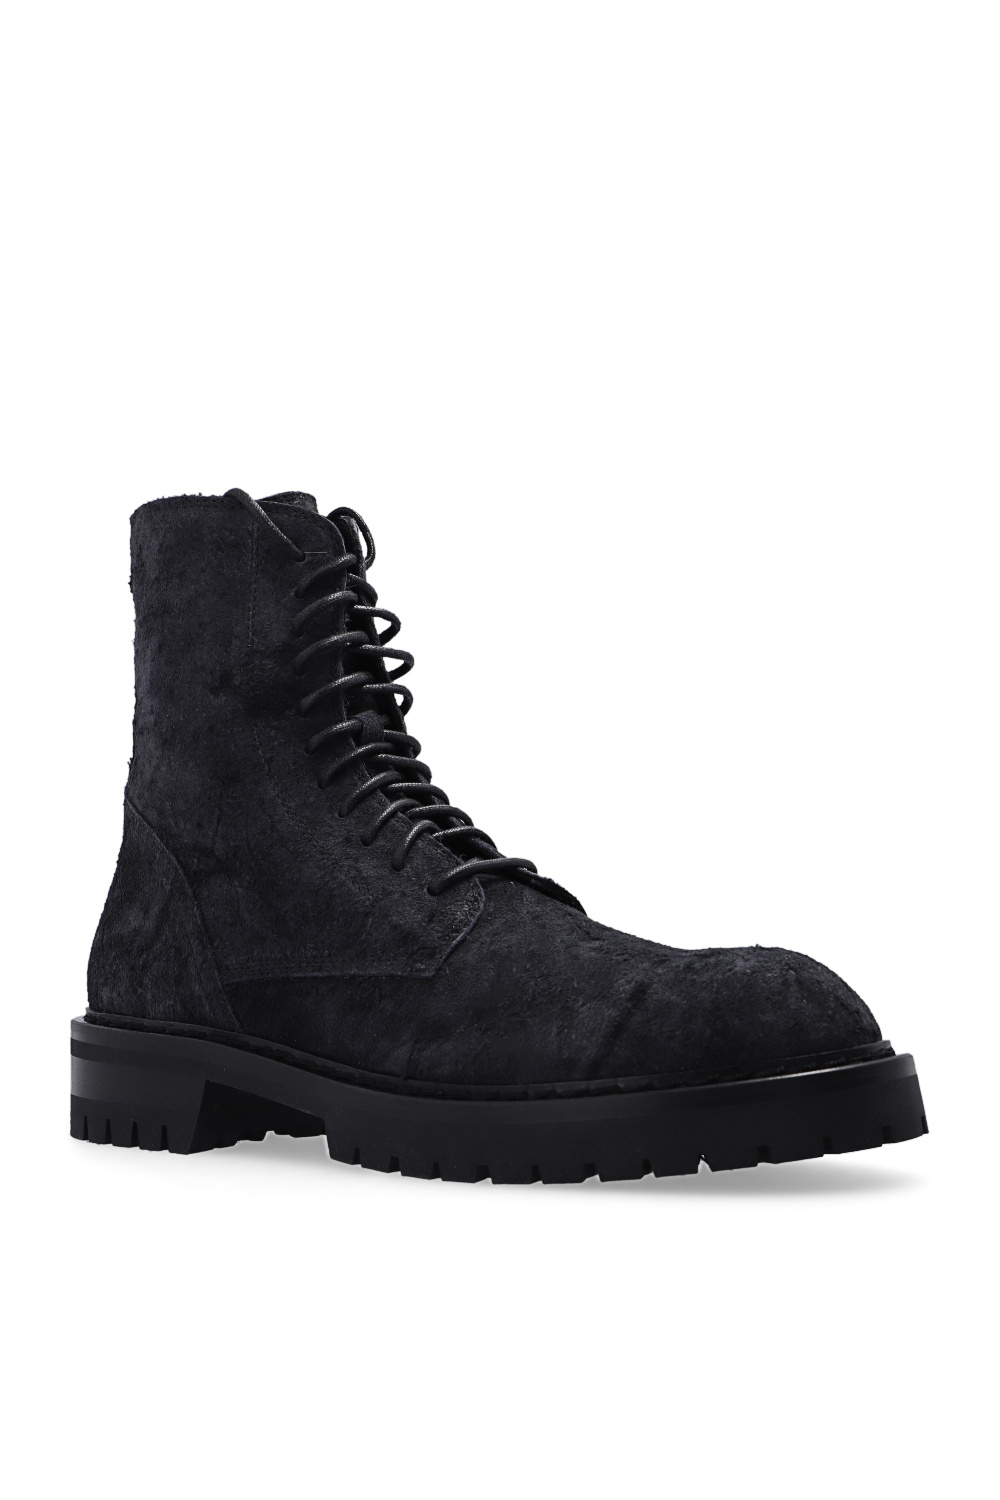 Grey 'Alec' suede ankle boots Ann Demeulemeester - nike joyride cc